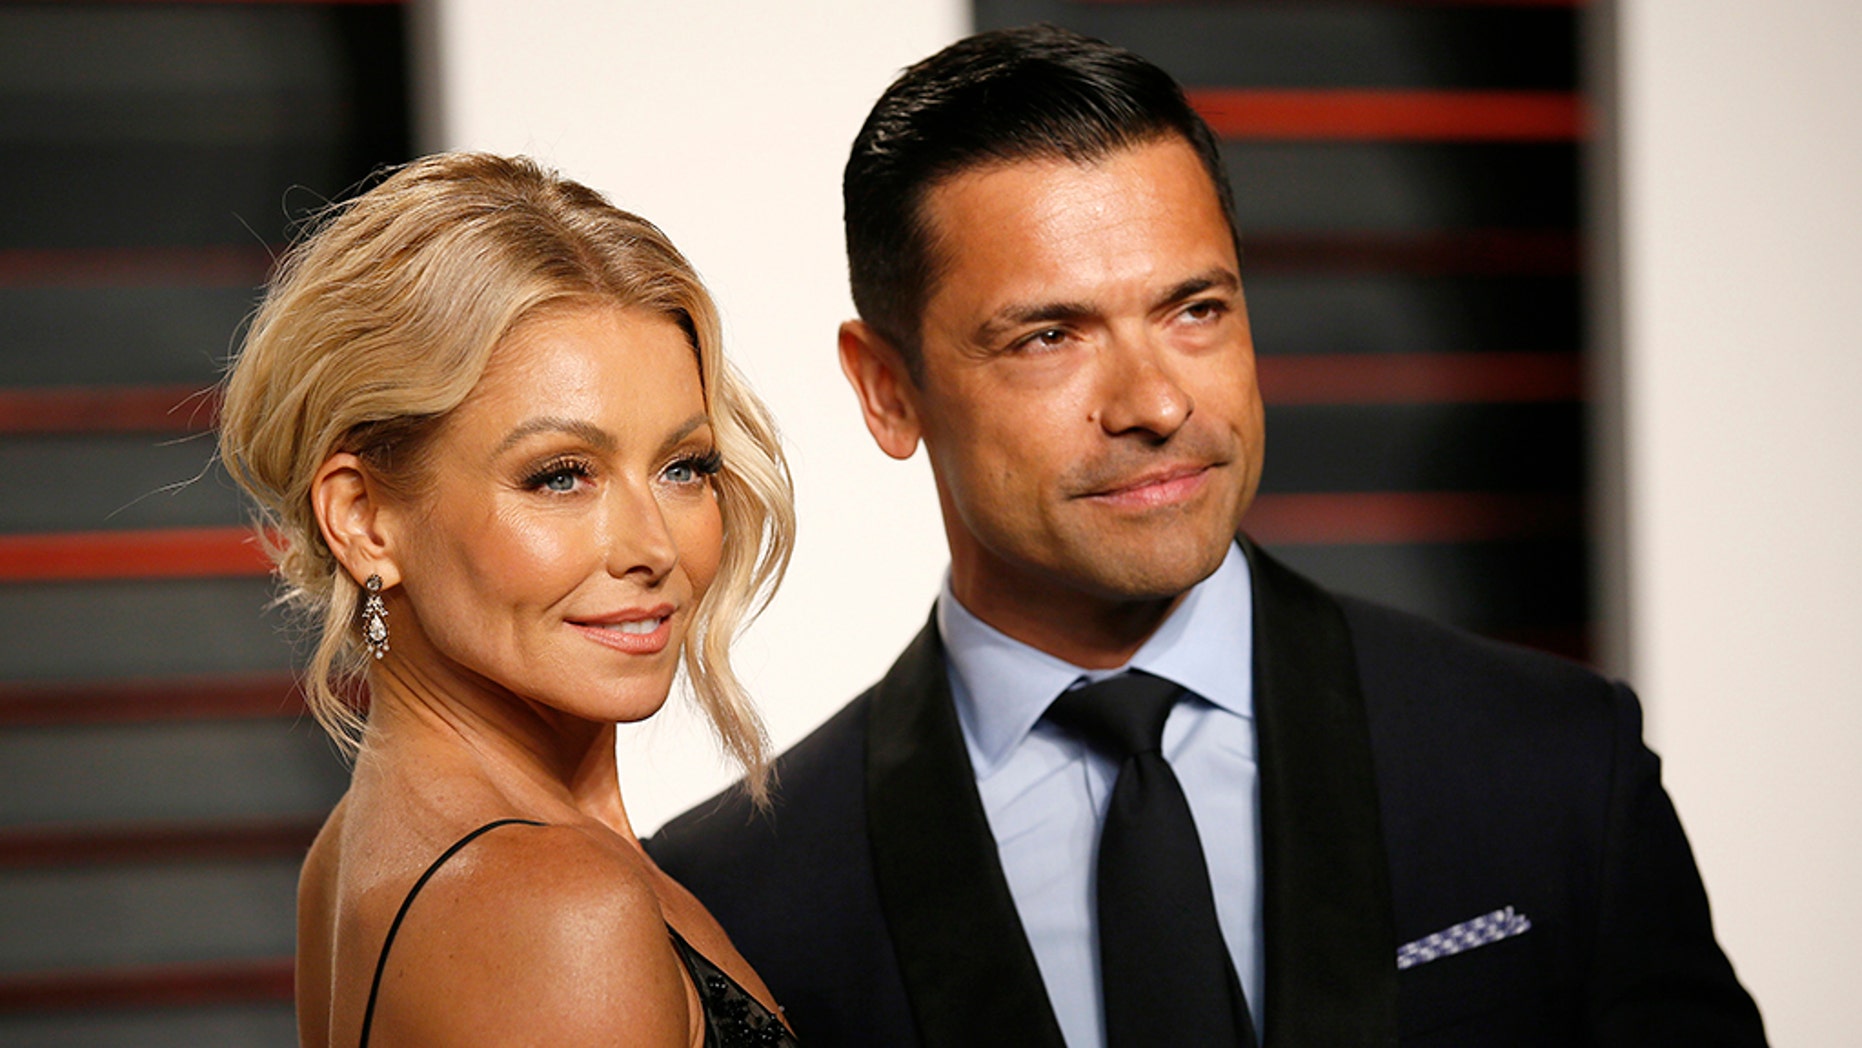 Kelly Ripa leaves flirty message on husband Mark Conseulos’ Instagram post: ‘Daddy, I love when you take over’